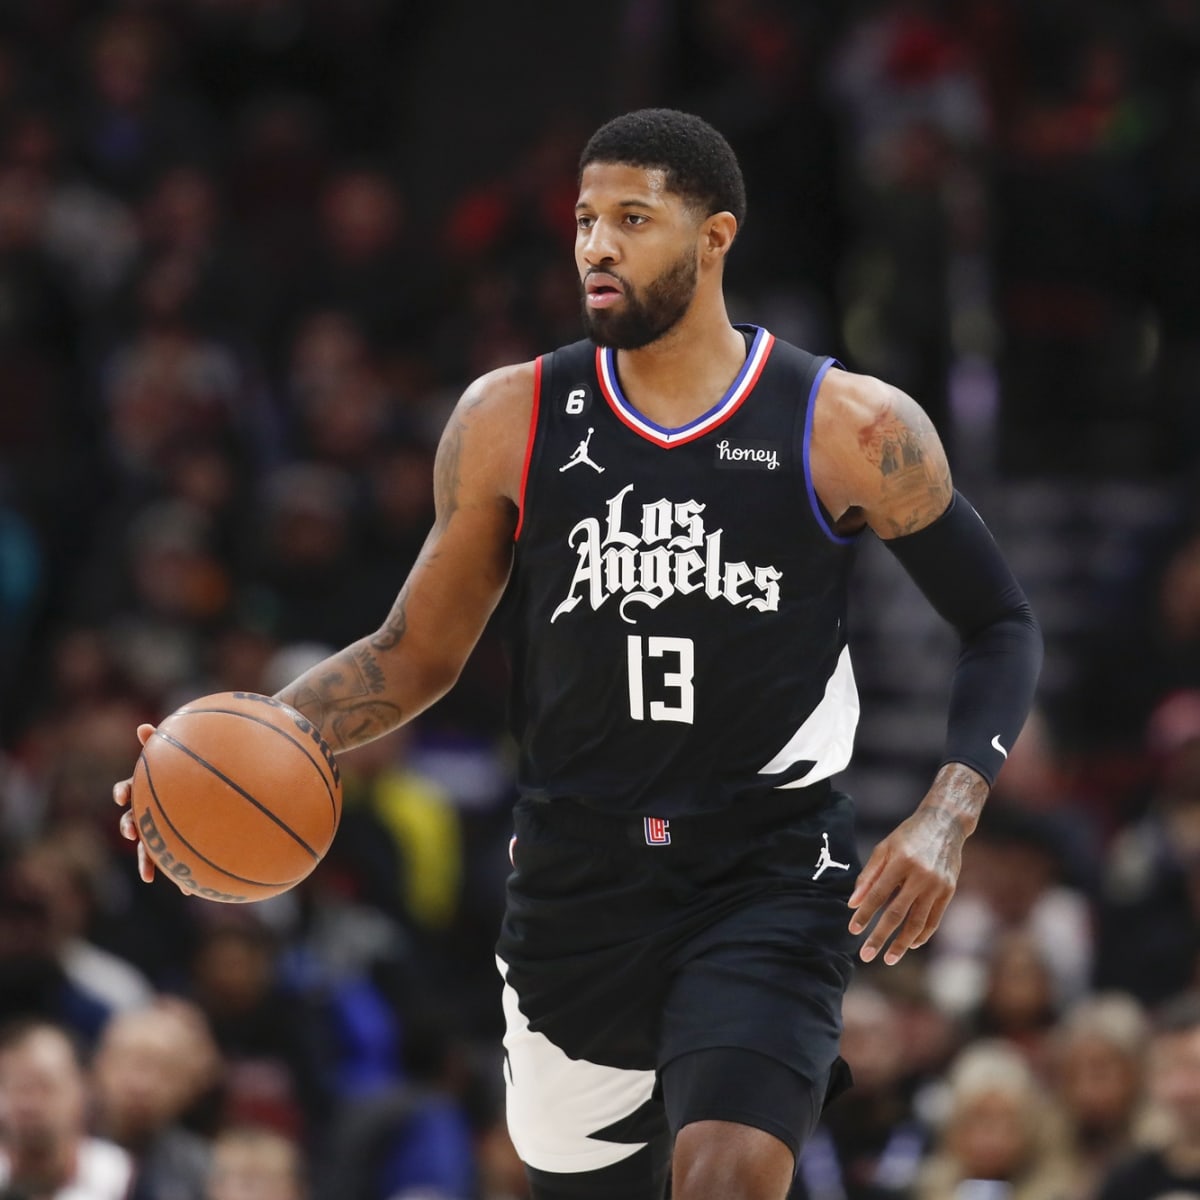 Paul George, Los Angeles Clippers Rumors: Paul George Might Move to the Indiana Pacers